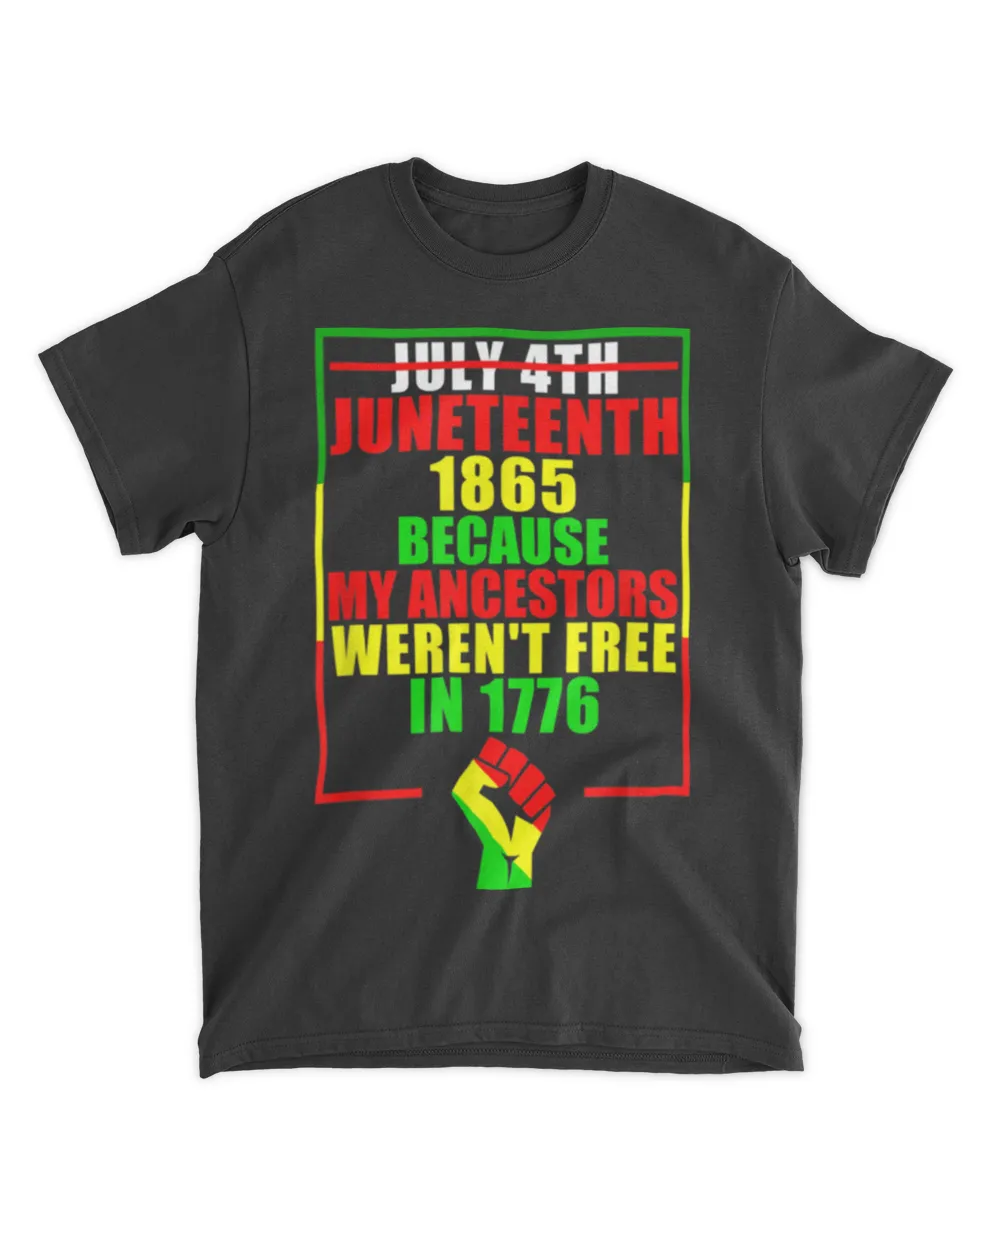 July 4th Juneteenth 1865 Fist Freedom African Americans T-Shirt tee